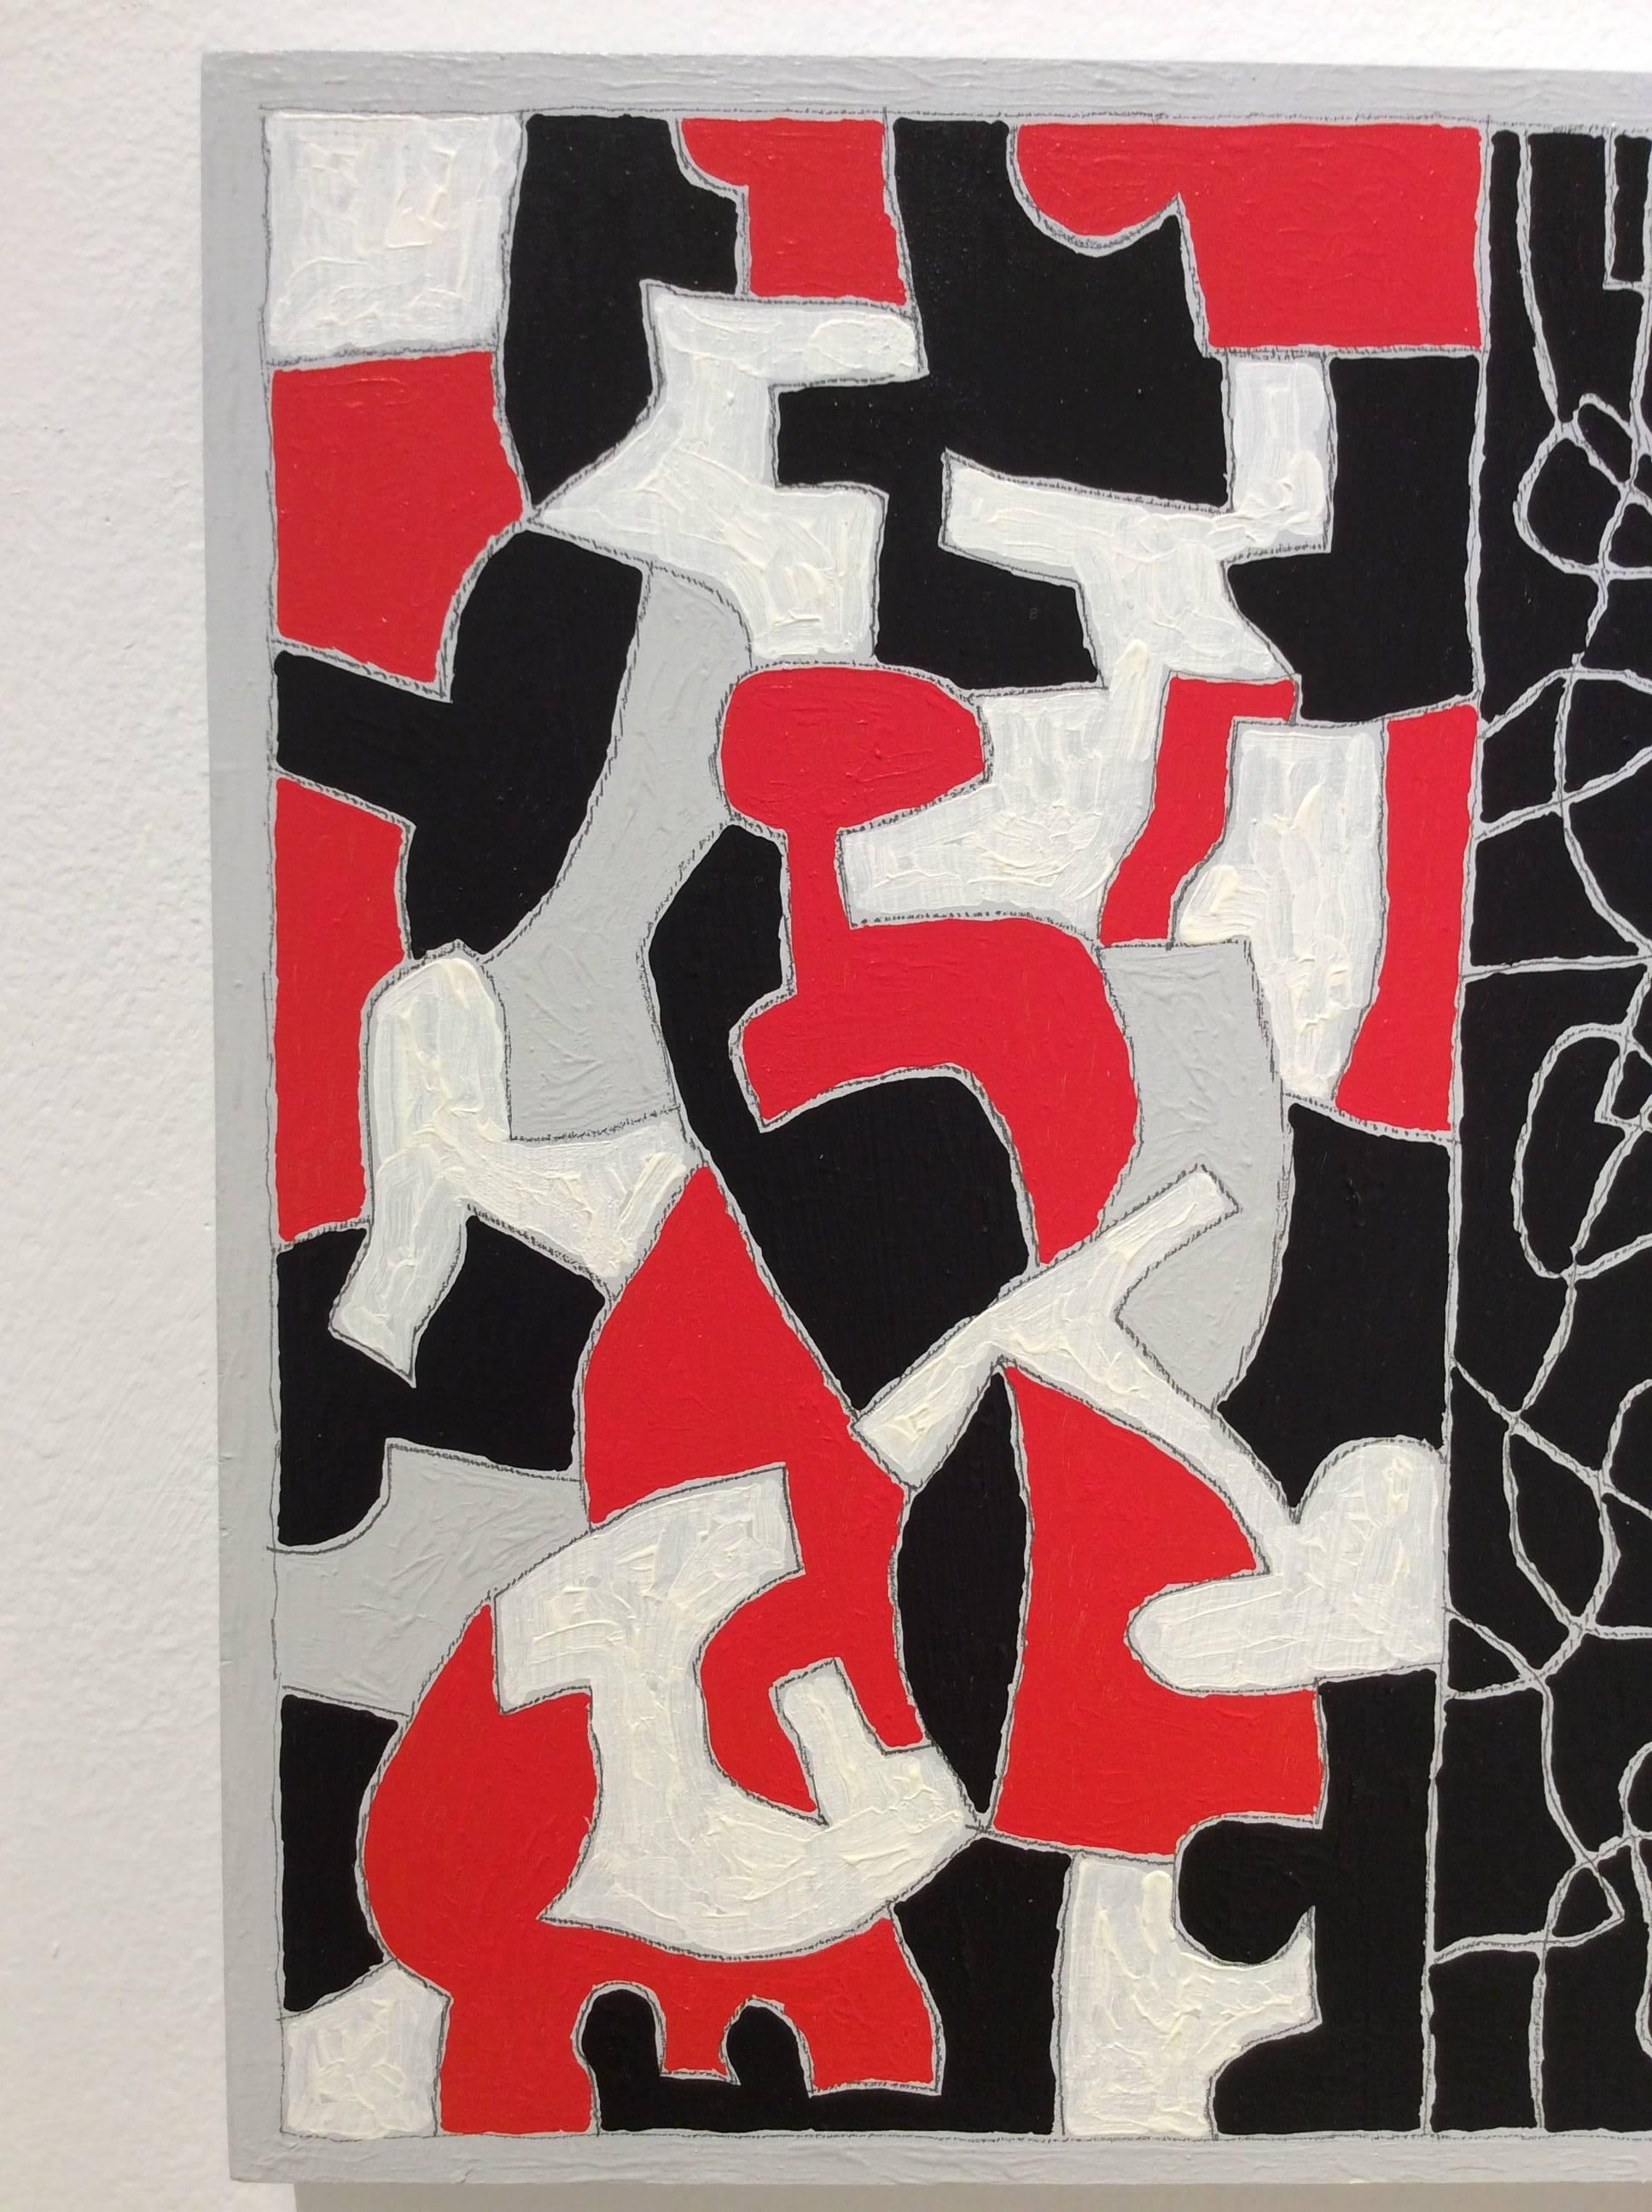 Interlock #30 (Modern, Graphic Black, White & Red Abstract Painting on Panel) For Sale 1